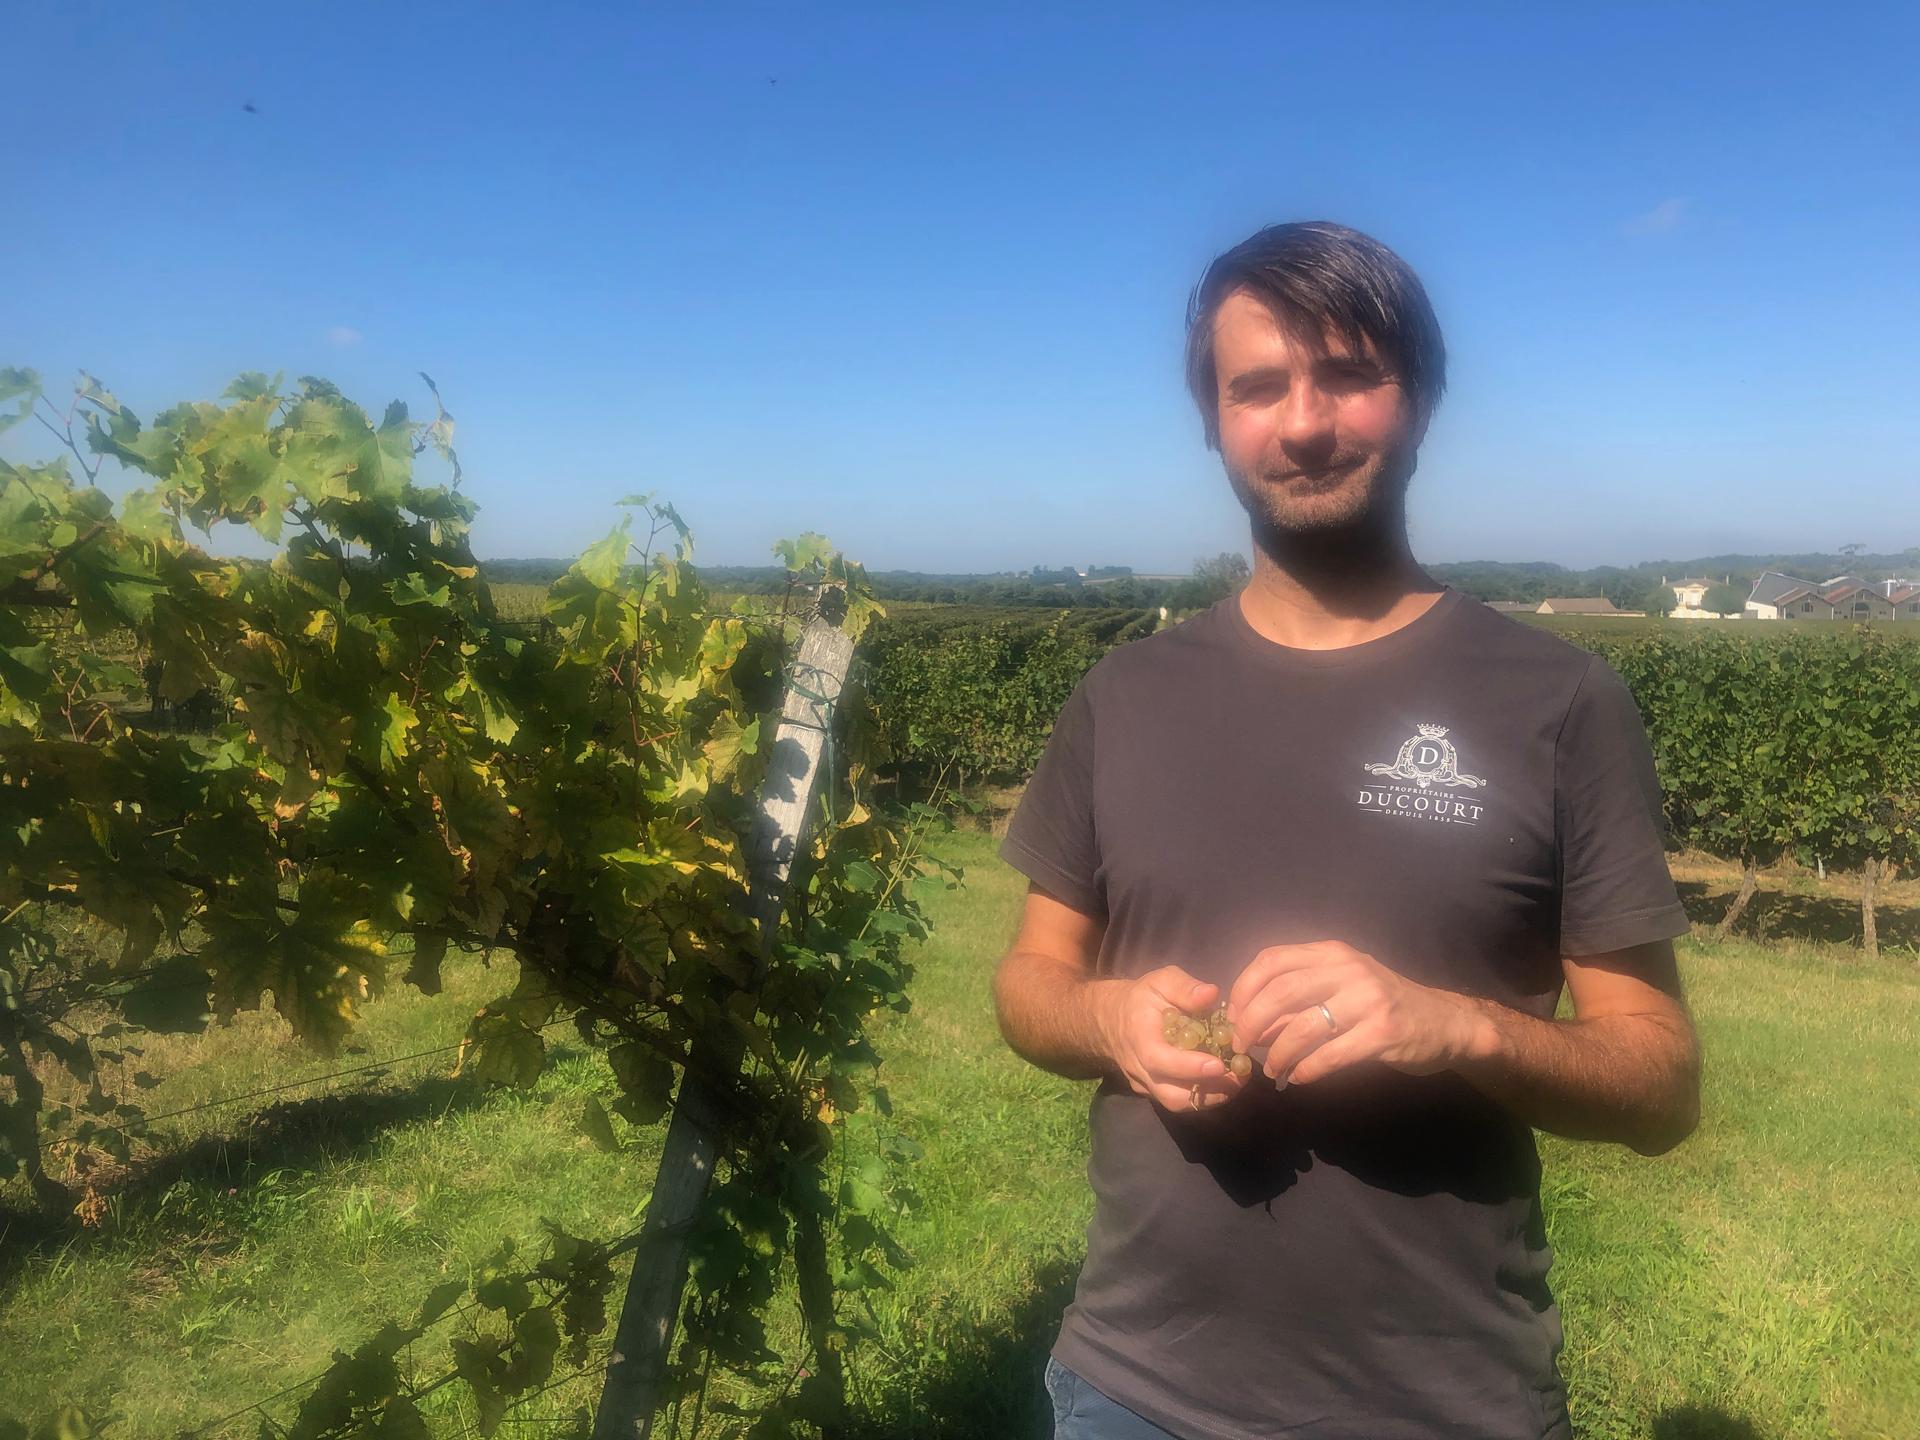 Winegrower Jonathan Ducourt showed off a not-so-hidden secret: neat rows of six, experimental hybrid vines at his family's vineyard near Bordeaux, France. 